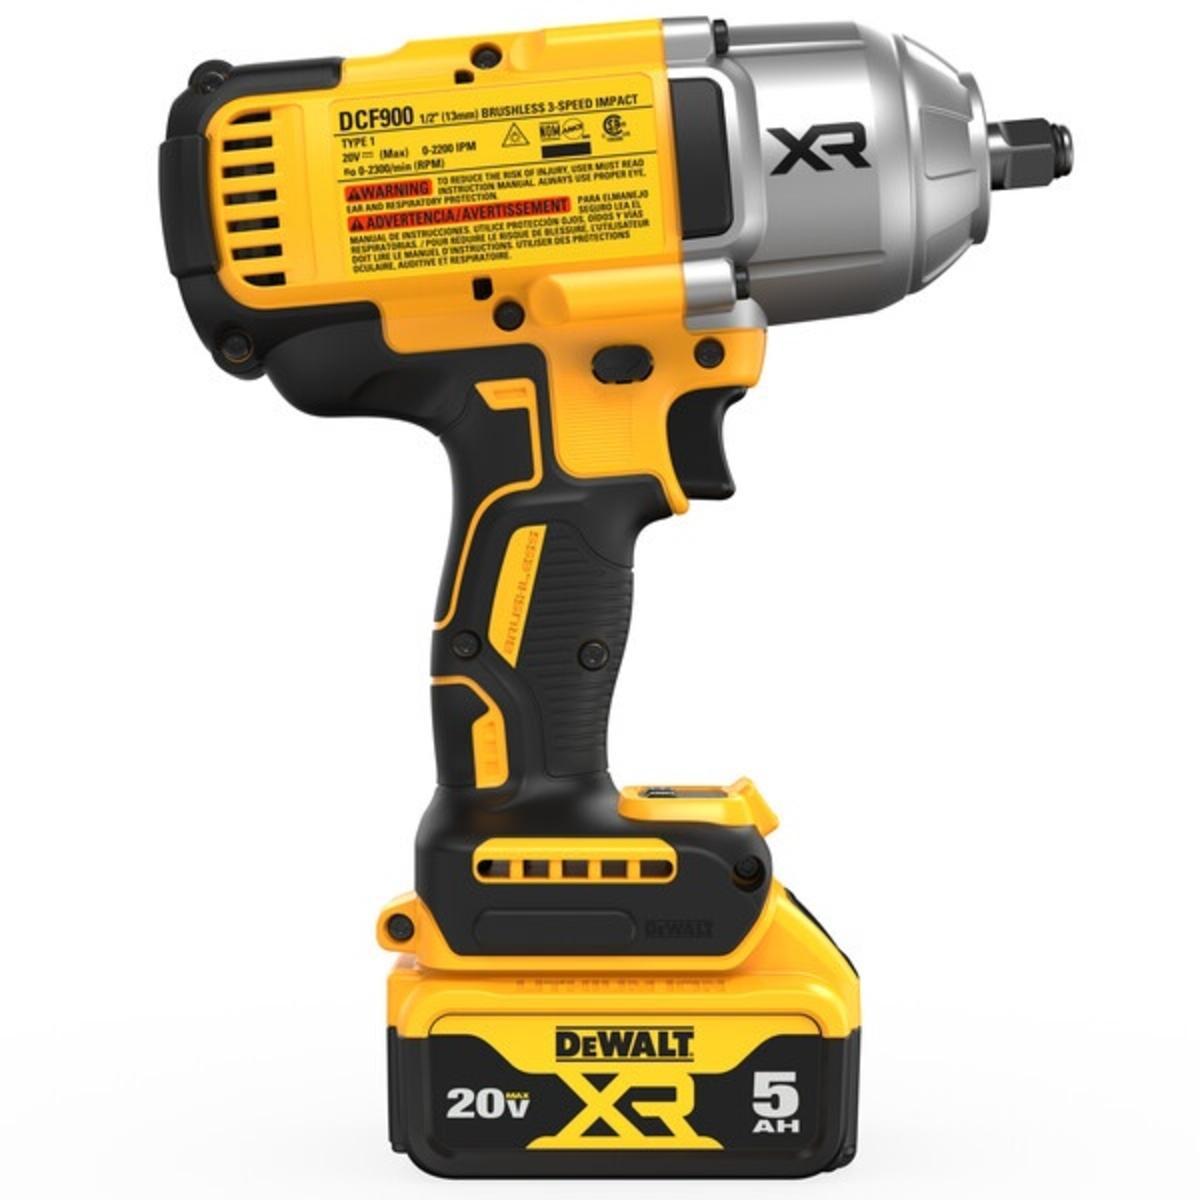 DeWalt 20V MAX* XR® 1/2 In. High Torque Impact Wrench Side View